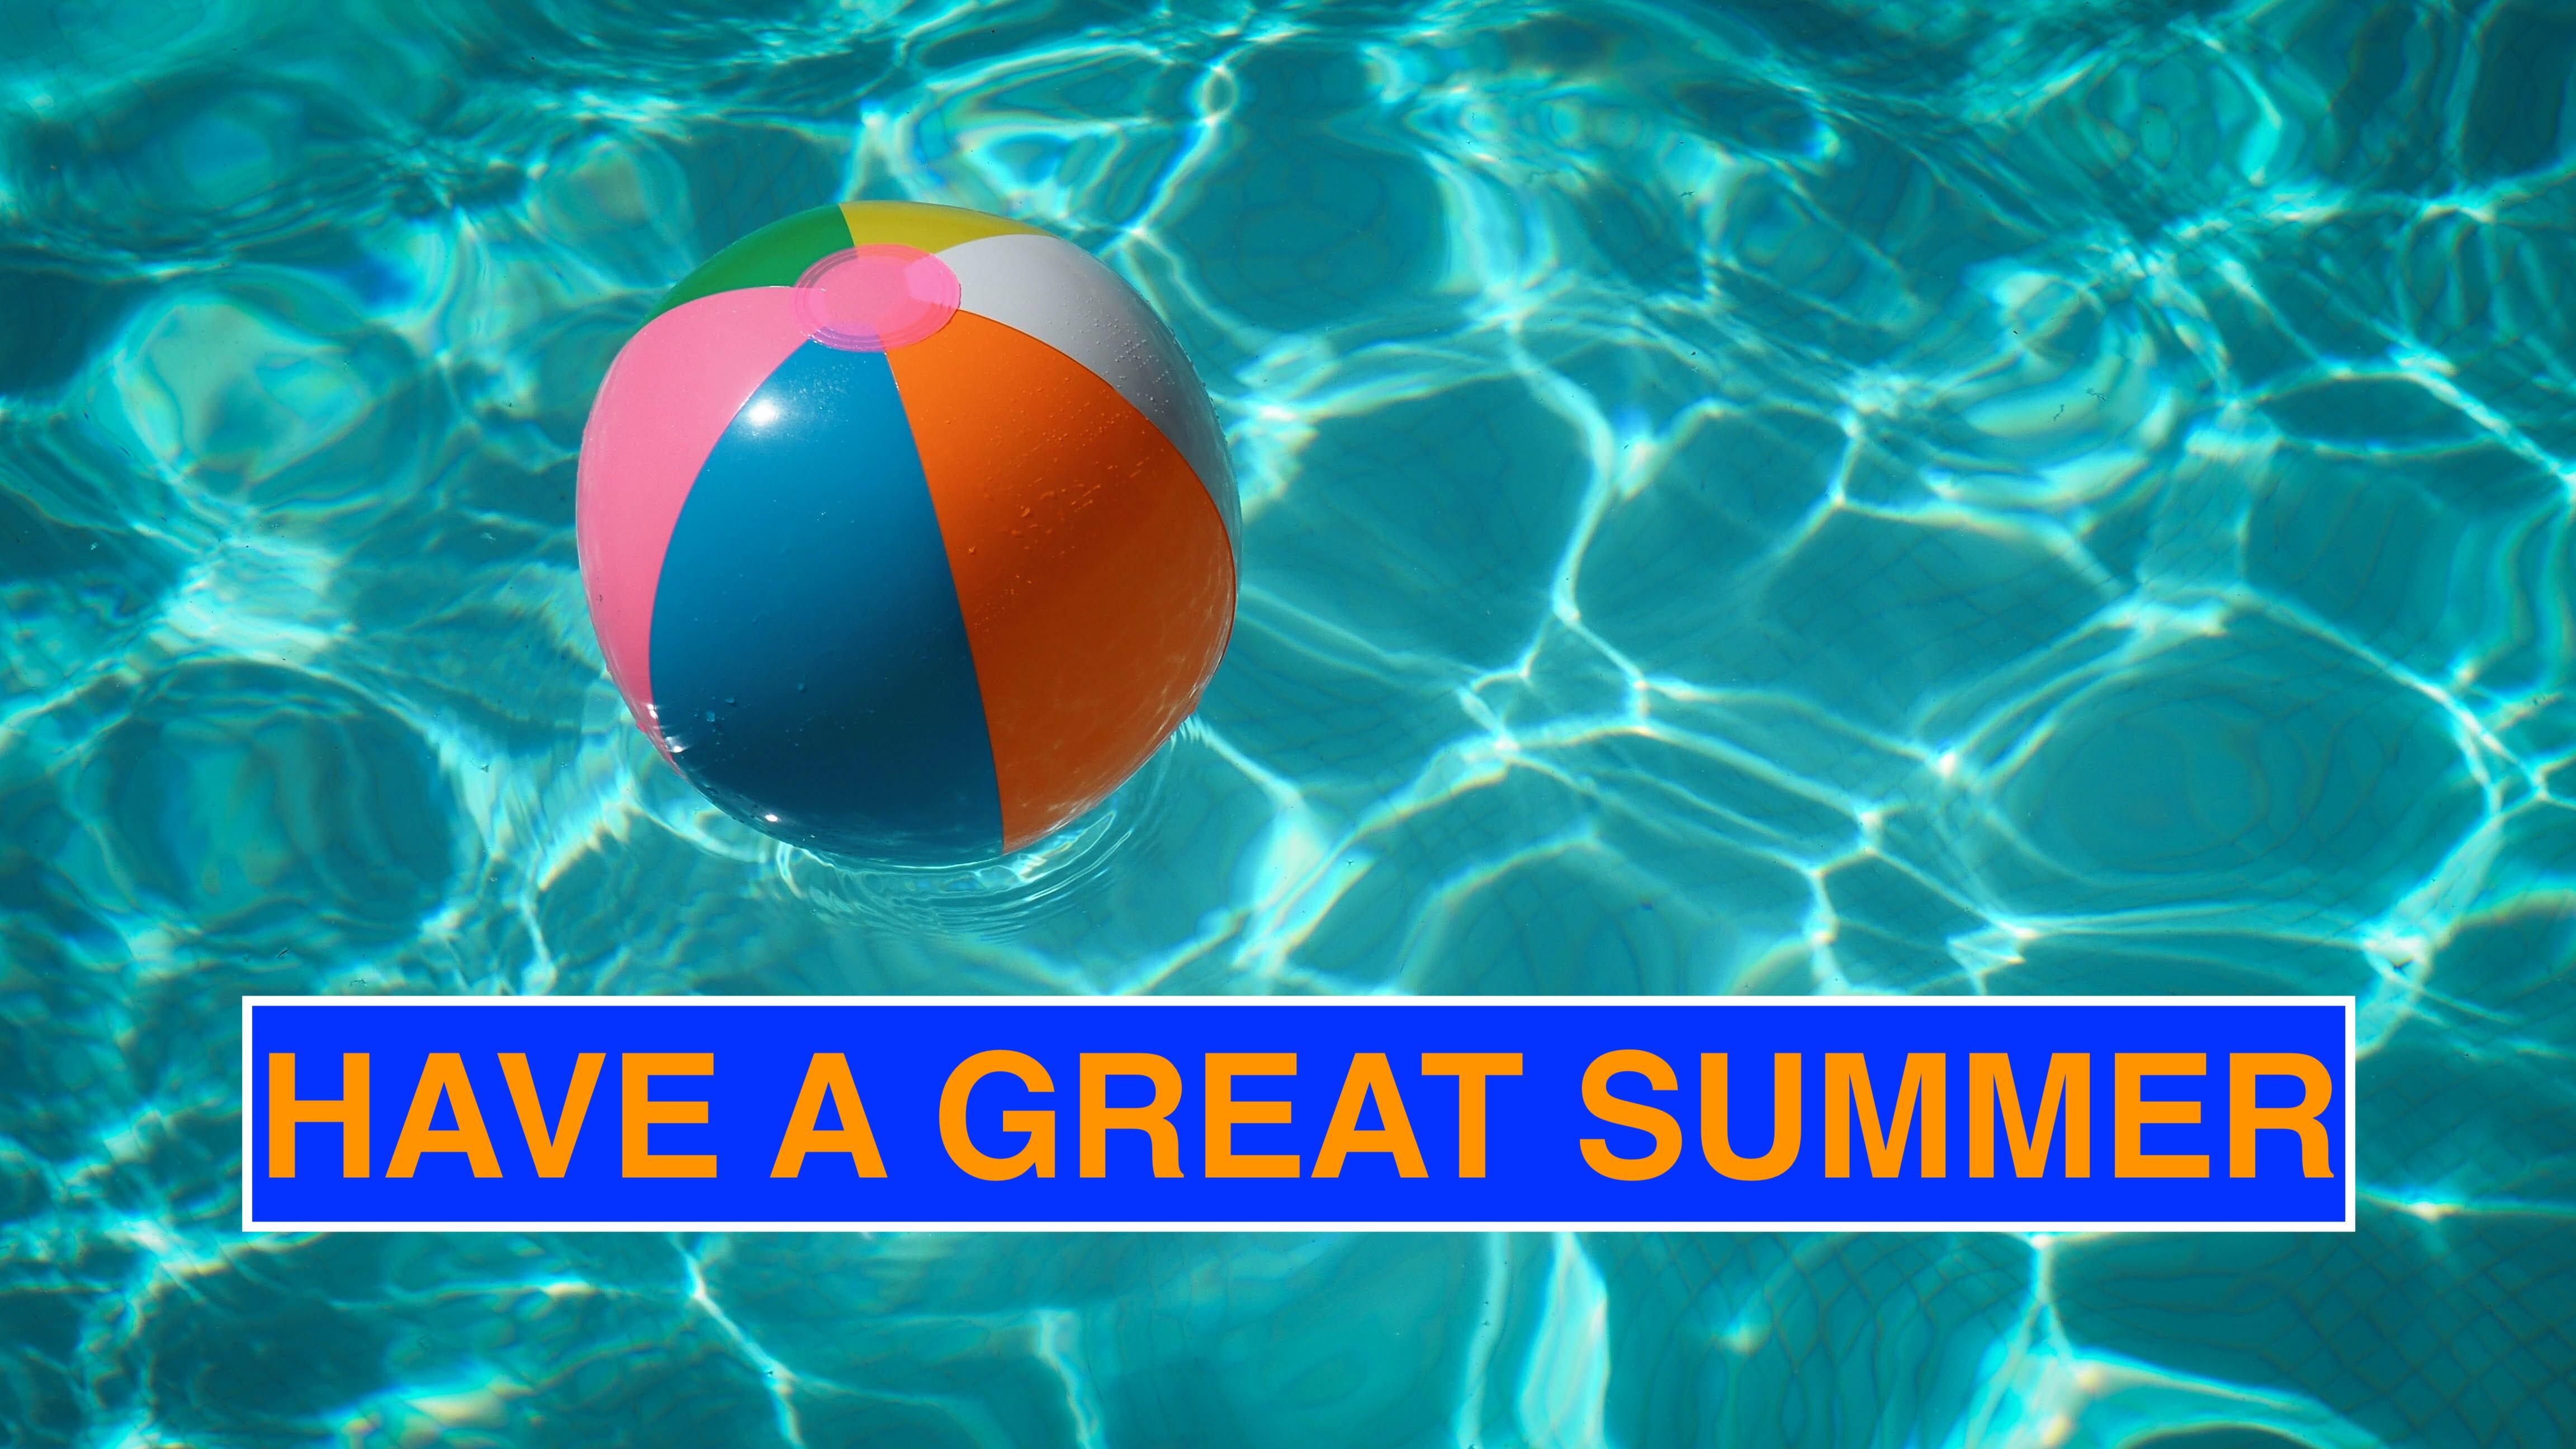 Have a great summer